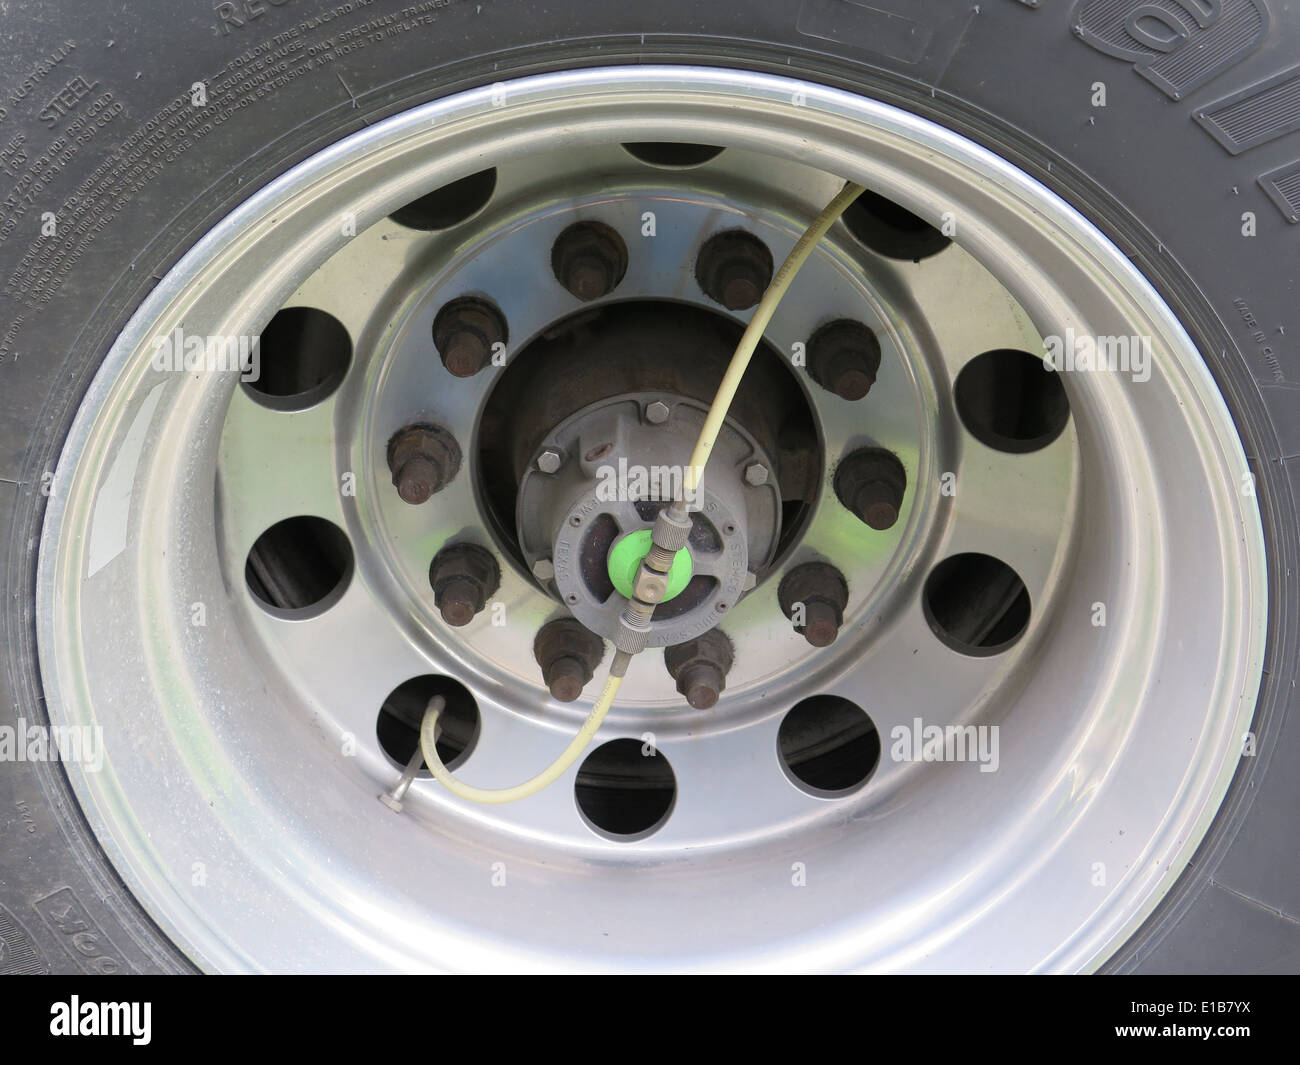 Large tanker truck wheel and tire with brake hose visible. Stock Photo